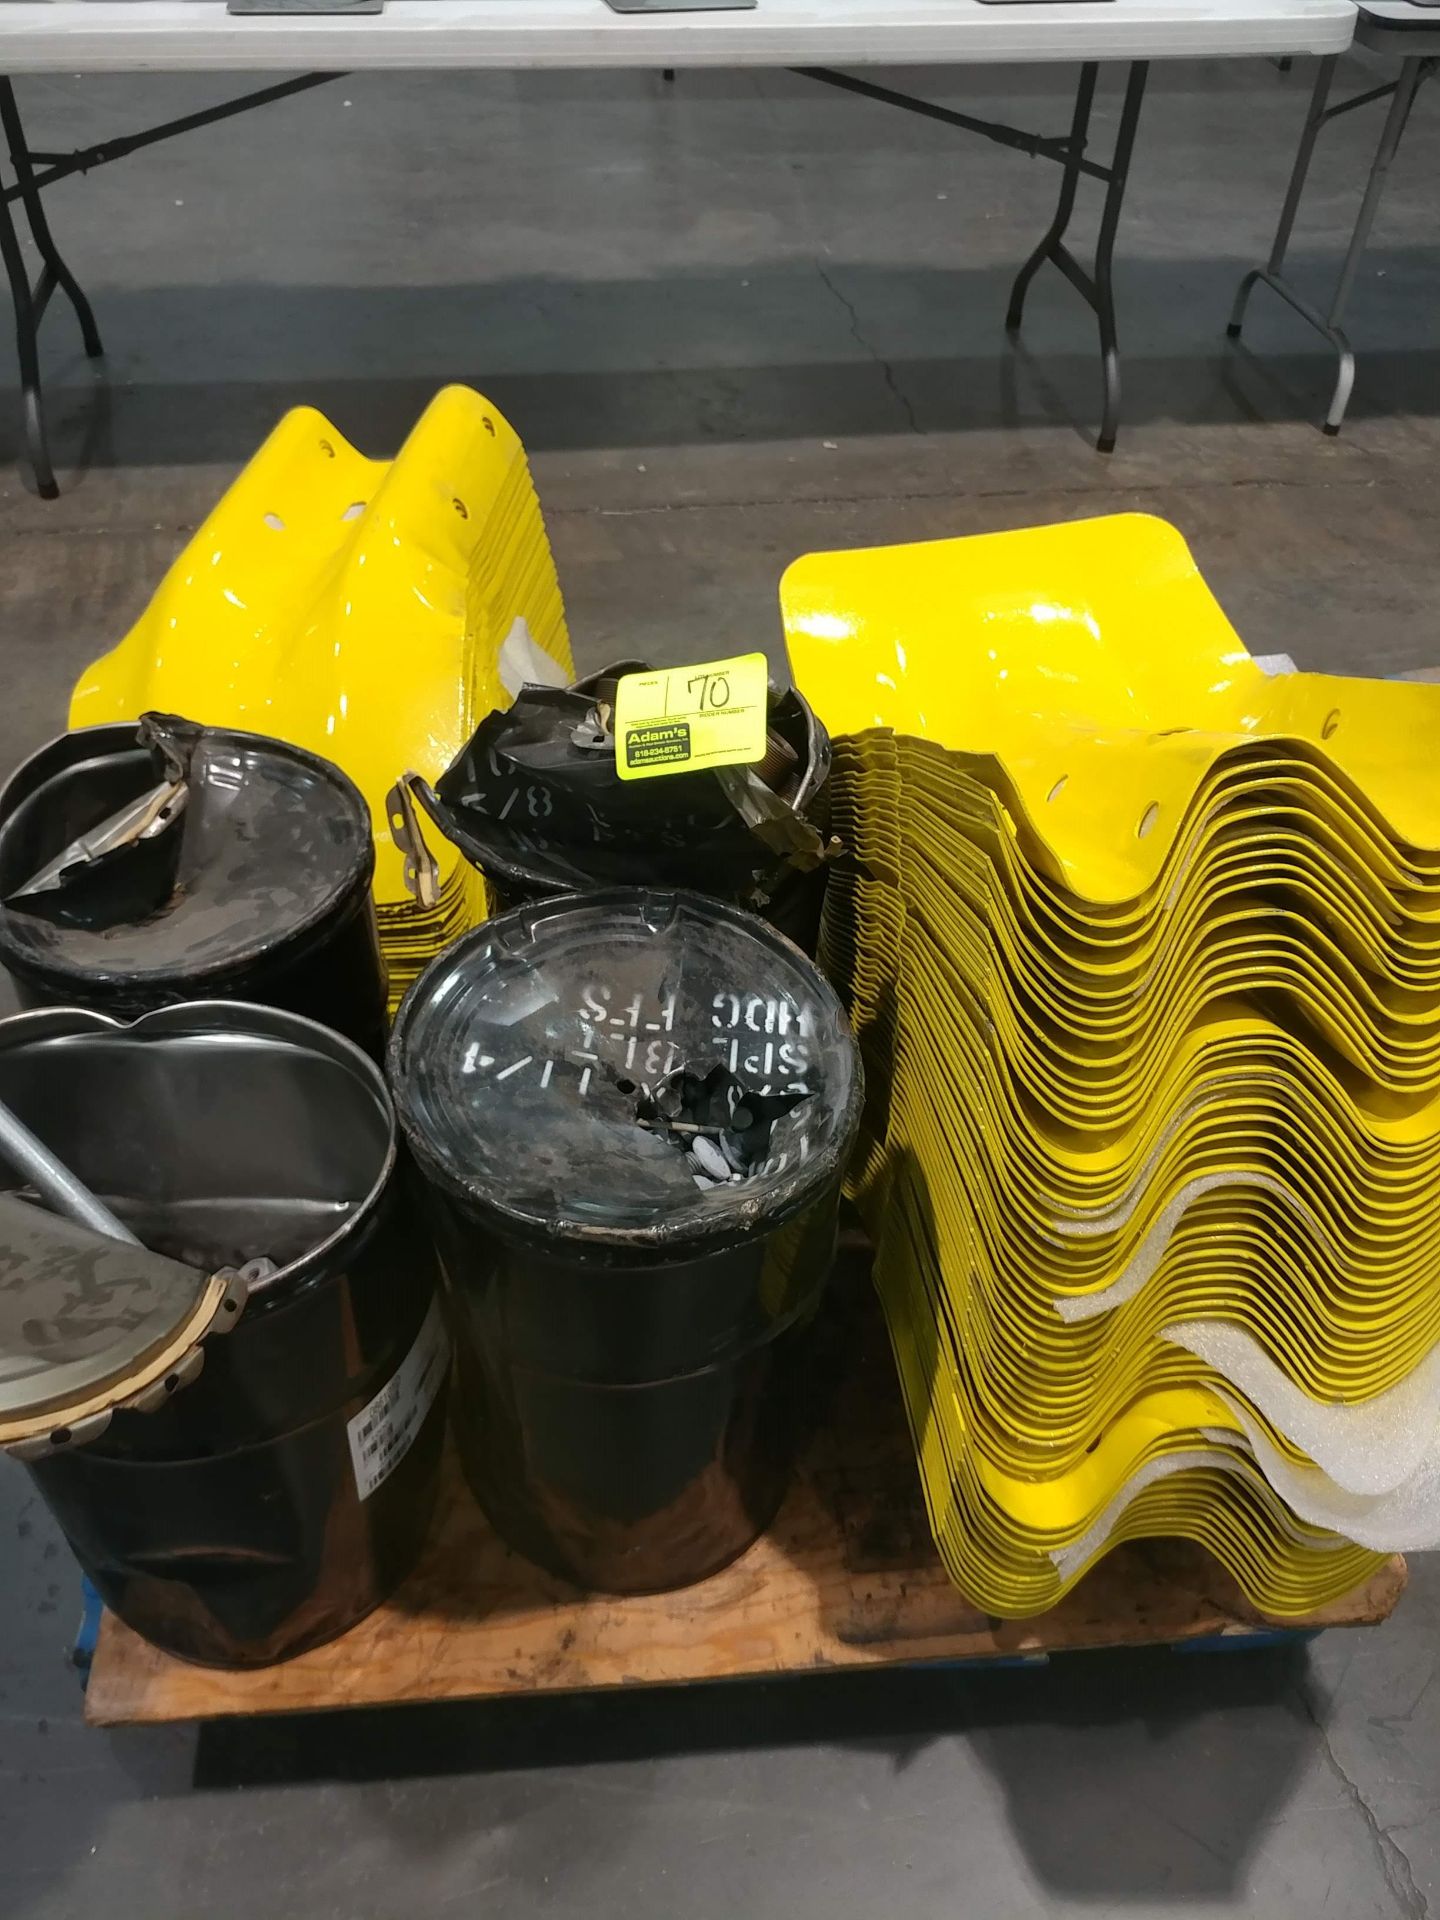 Yellow protective guards, nuts, and bolts